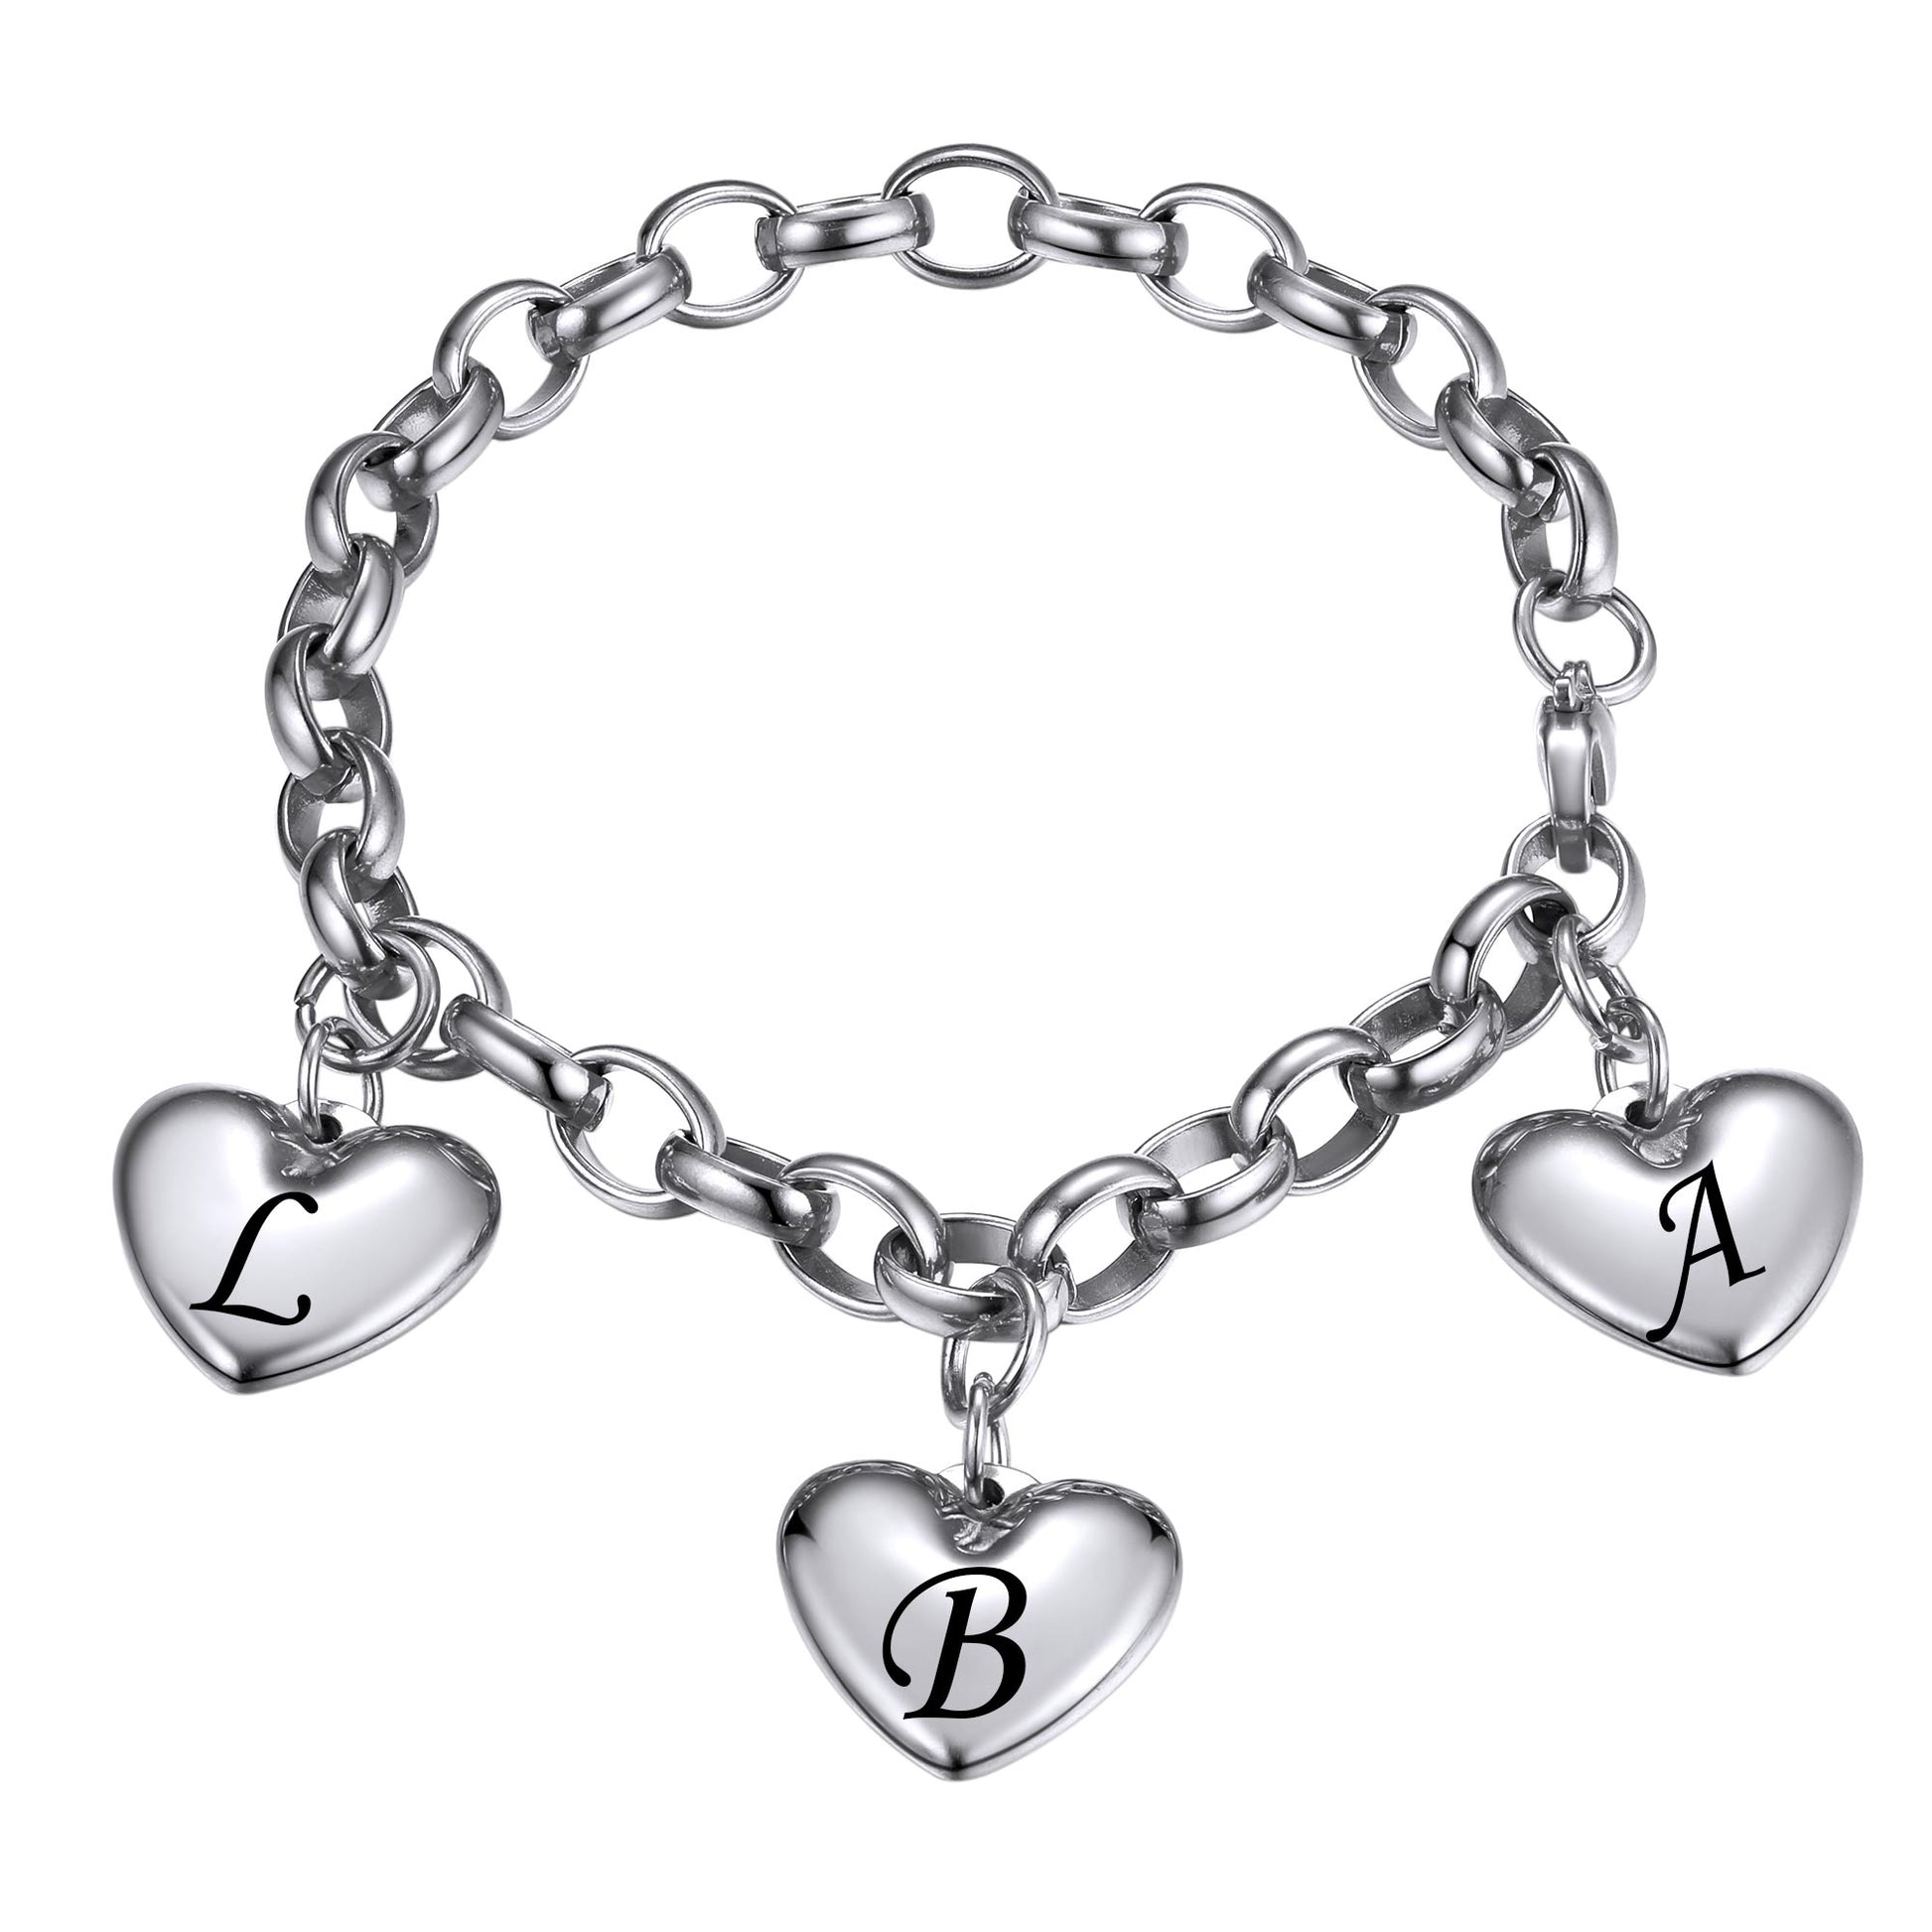 Personalized Engraved Hearts Charm Bracelet